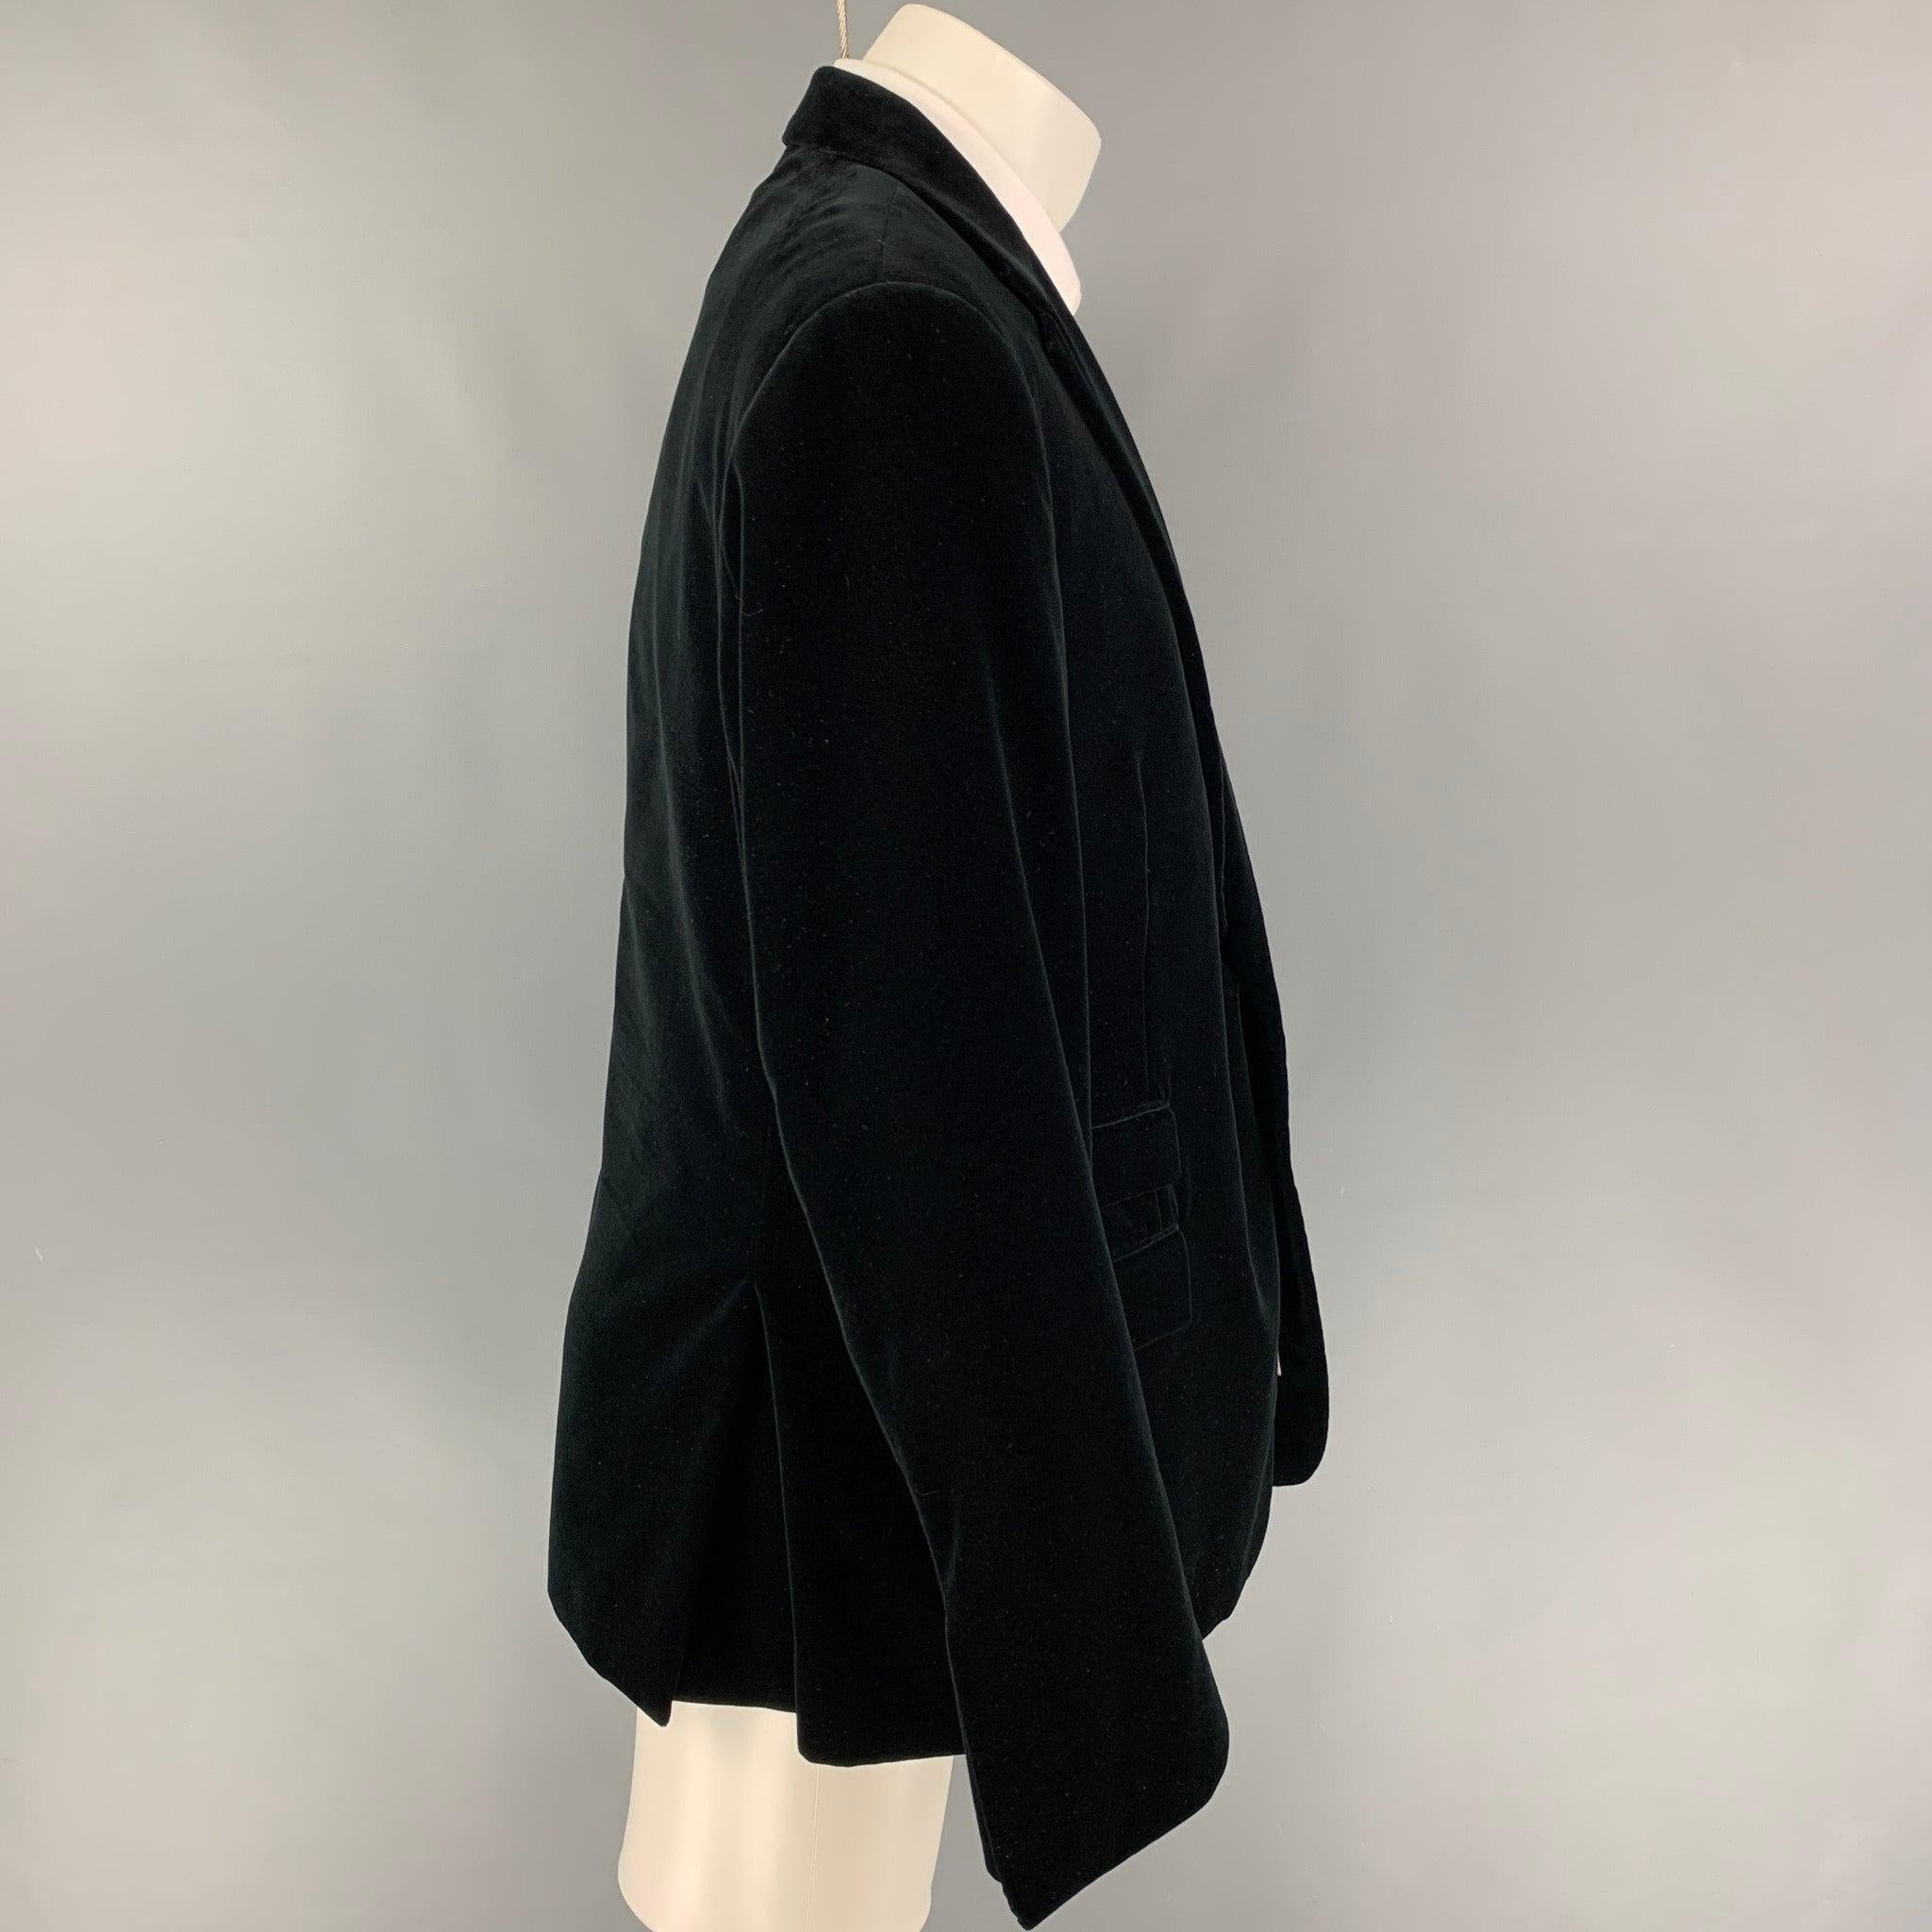 RALPH LAUREN 'Purple Label' custom fit sport coat comes in a black velvet with a full liner featuring a notch lapel, flap pockets, double back vent, and a double button closure. Made in Italy.
Very Good
Pre-Owned Condition. 

Marked:   48 R 